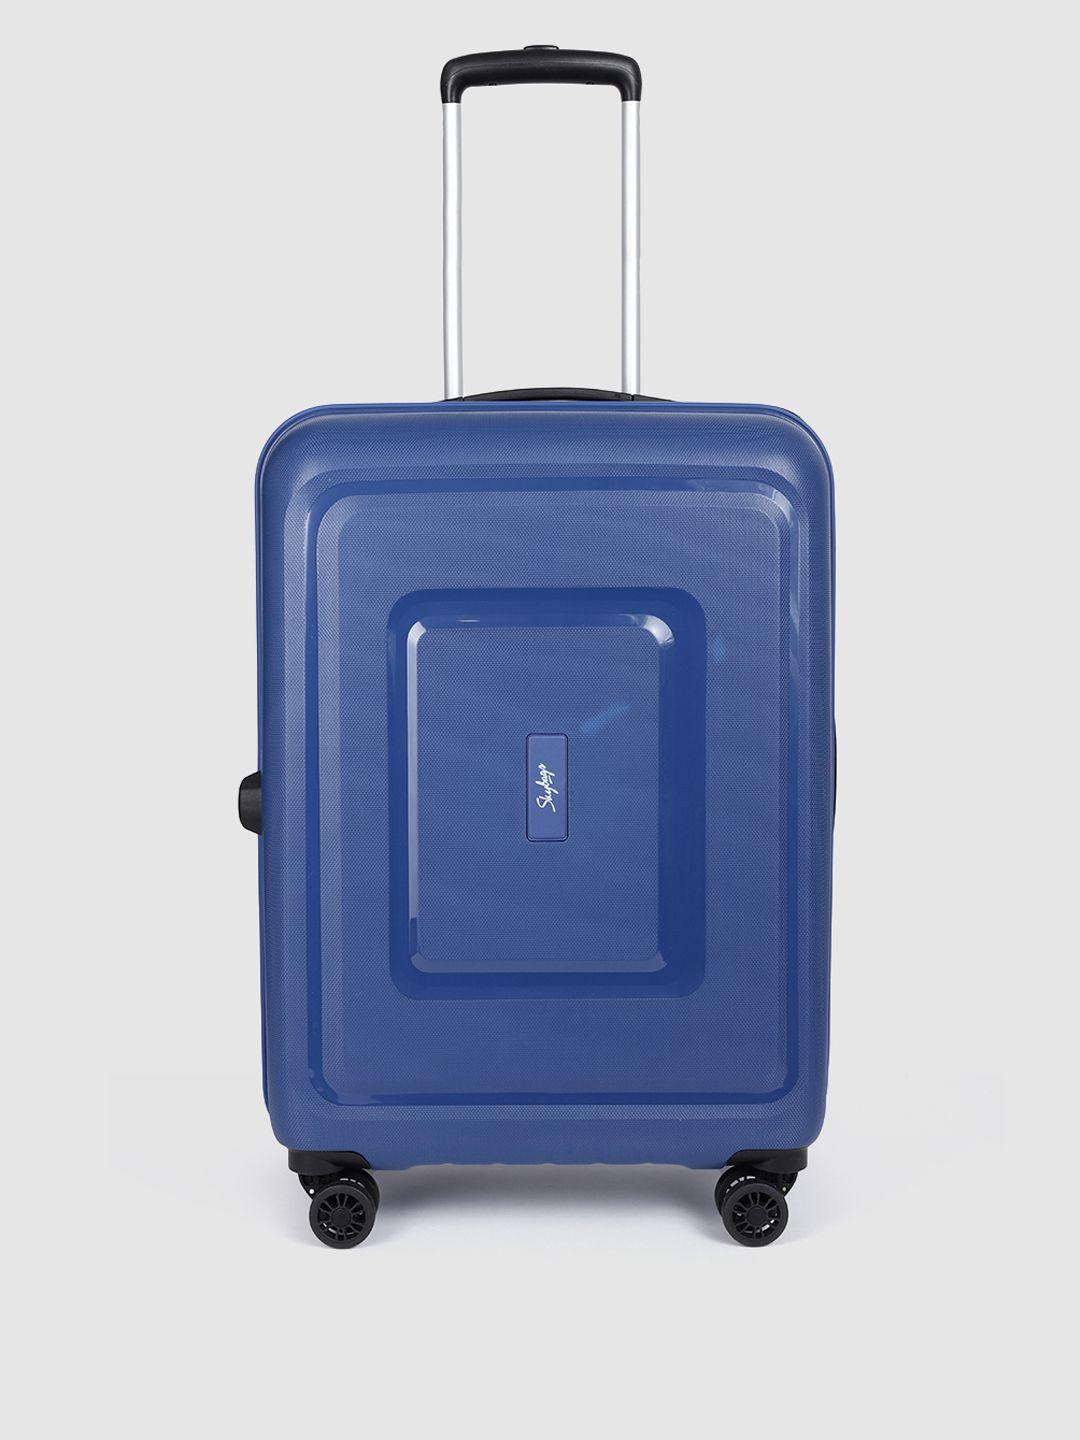 skybags-unisex-blue-textured-solid-hard-suitcase-trolley-bag